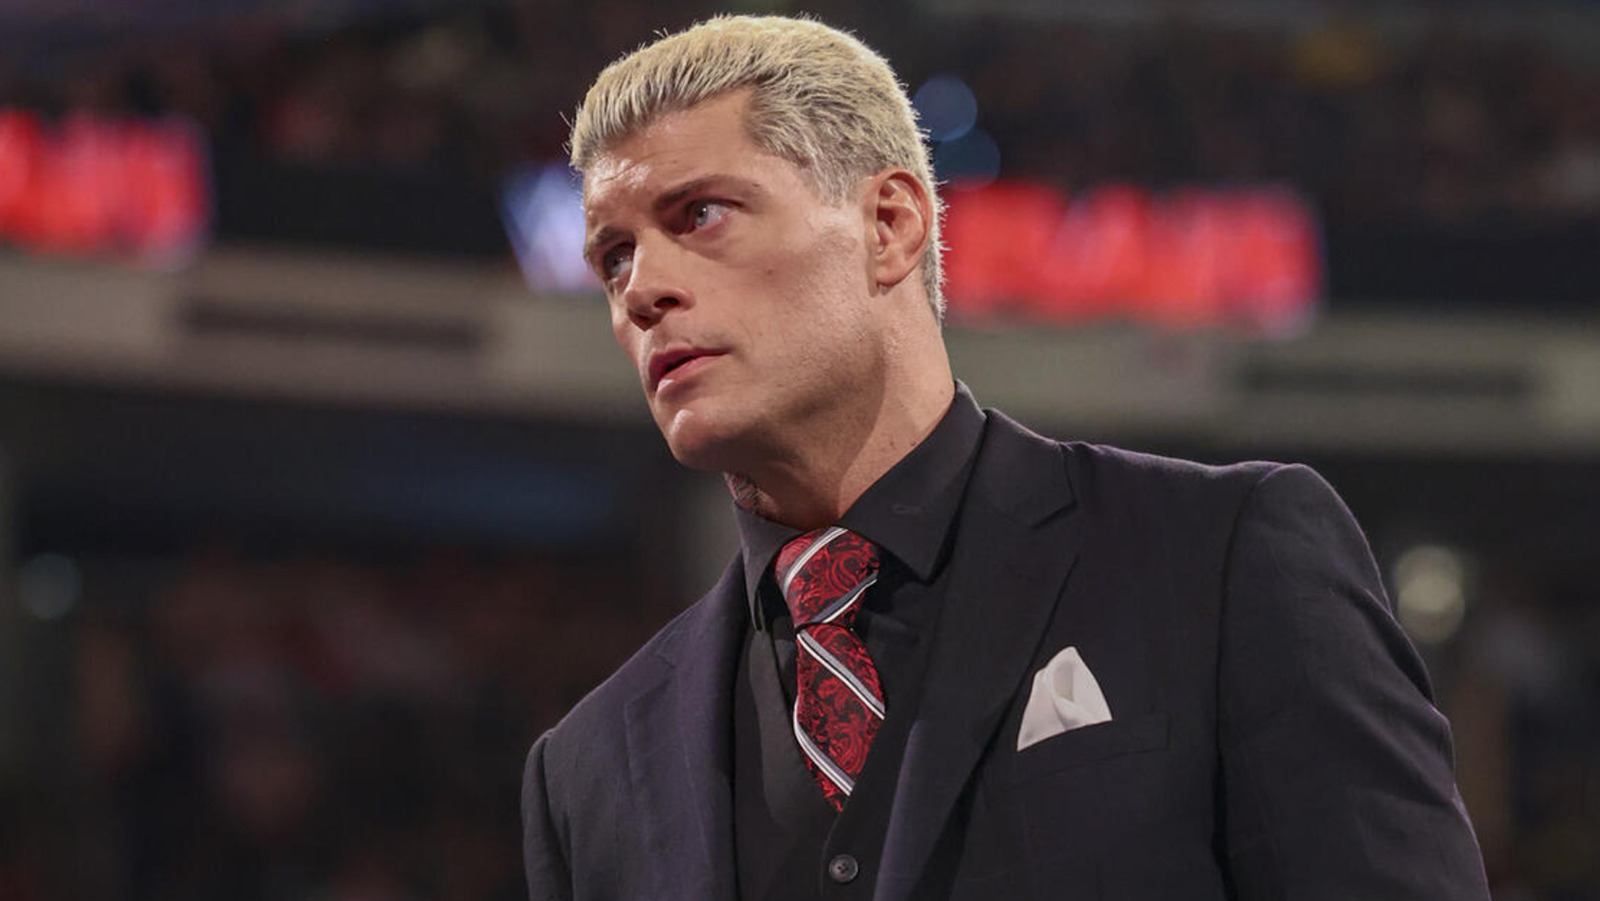 Brian Gewirtz Responds To Being Name-Dropped In Cody Rhodes Promo On WWE Raw